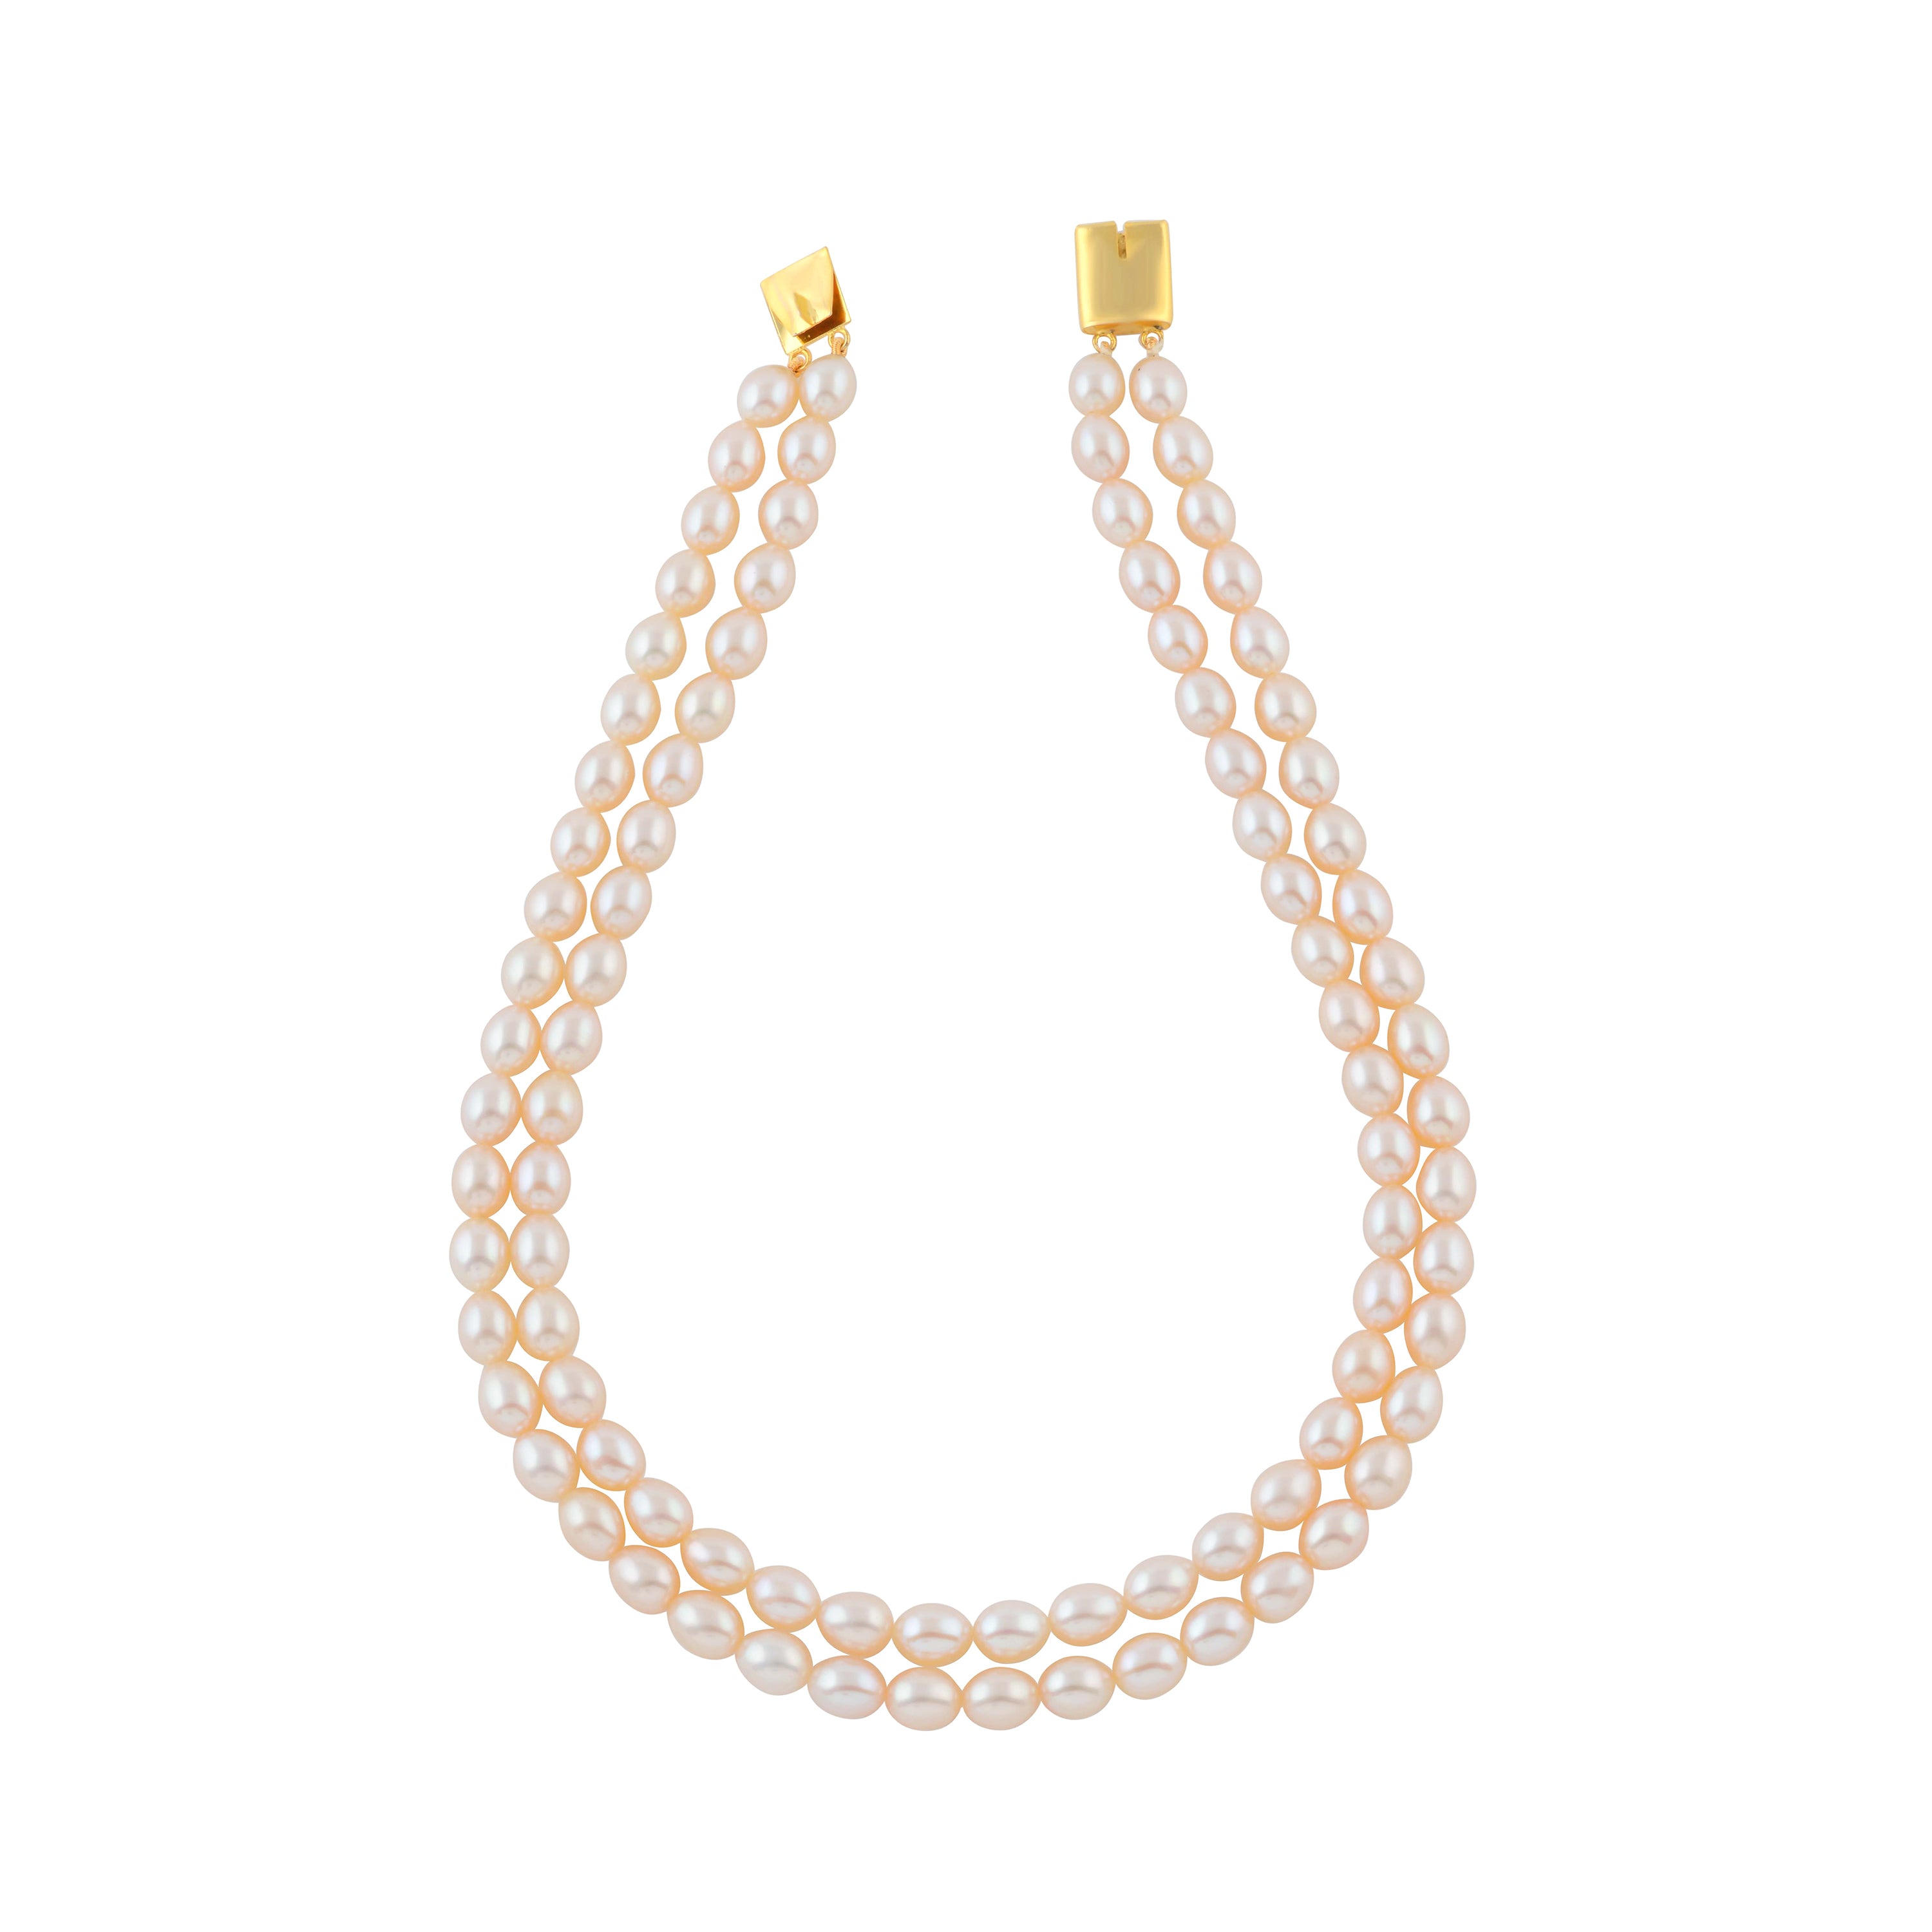 Stylish Double Line White Pearl Necklace